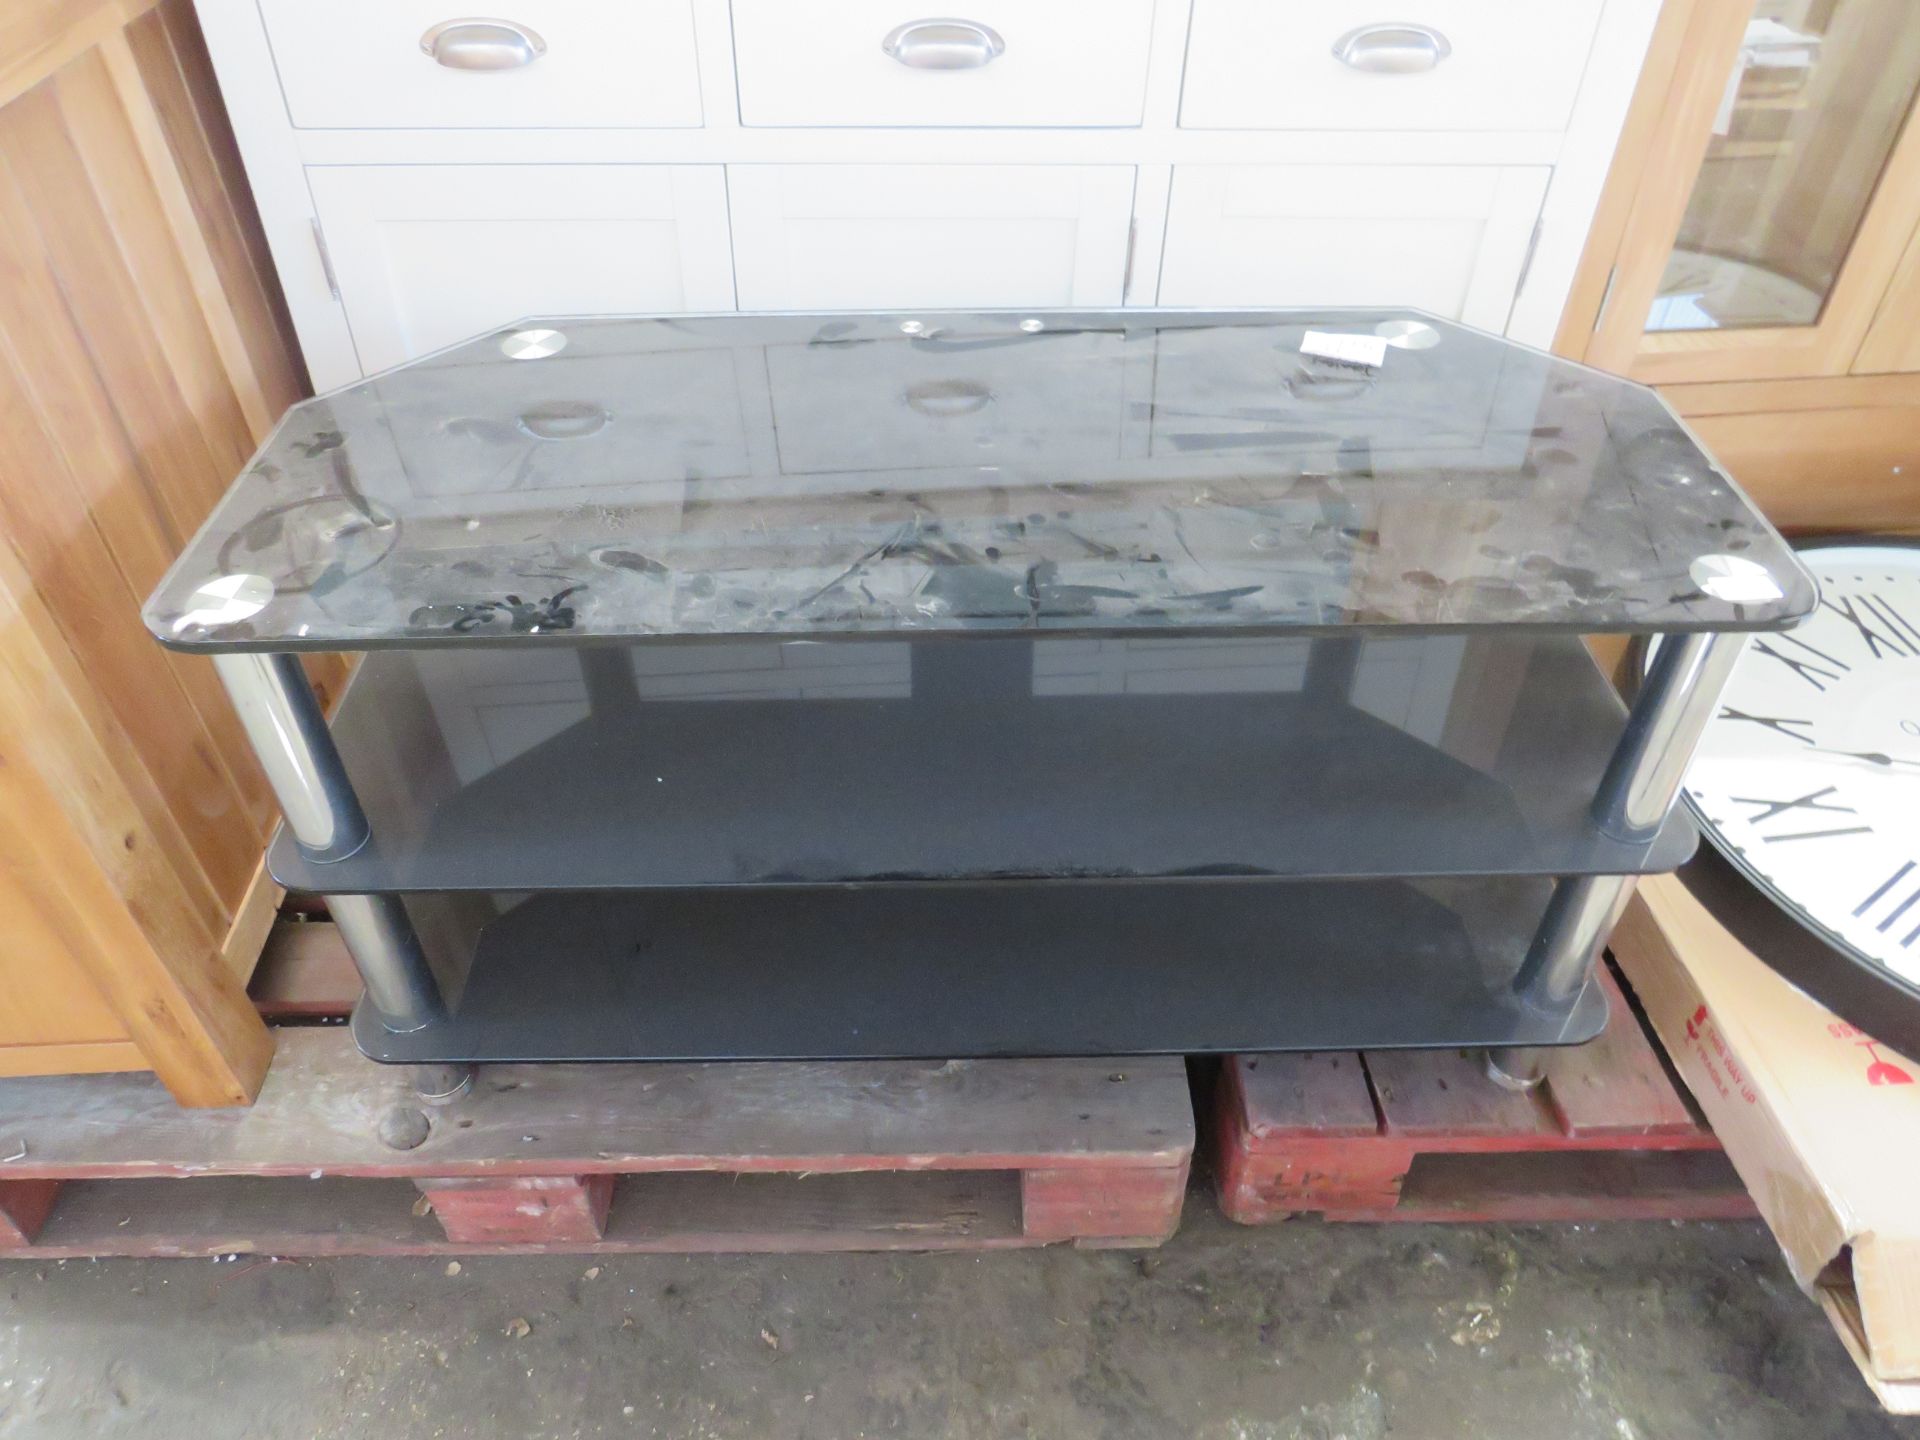 3-Tier Tempered Glass Tv Media Unit, Black & Chrome - Fairly Decent Condition With a Few Scuffs -